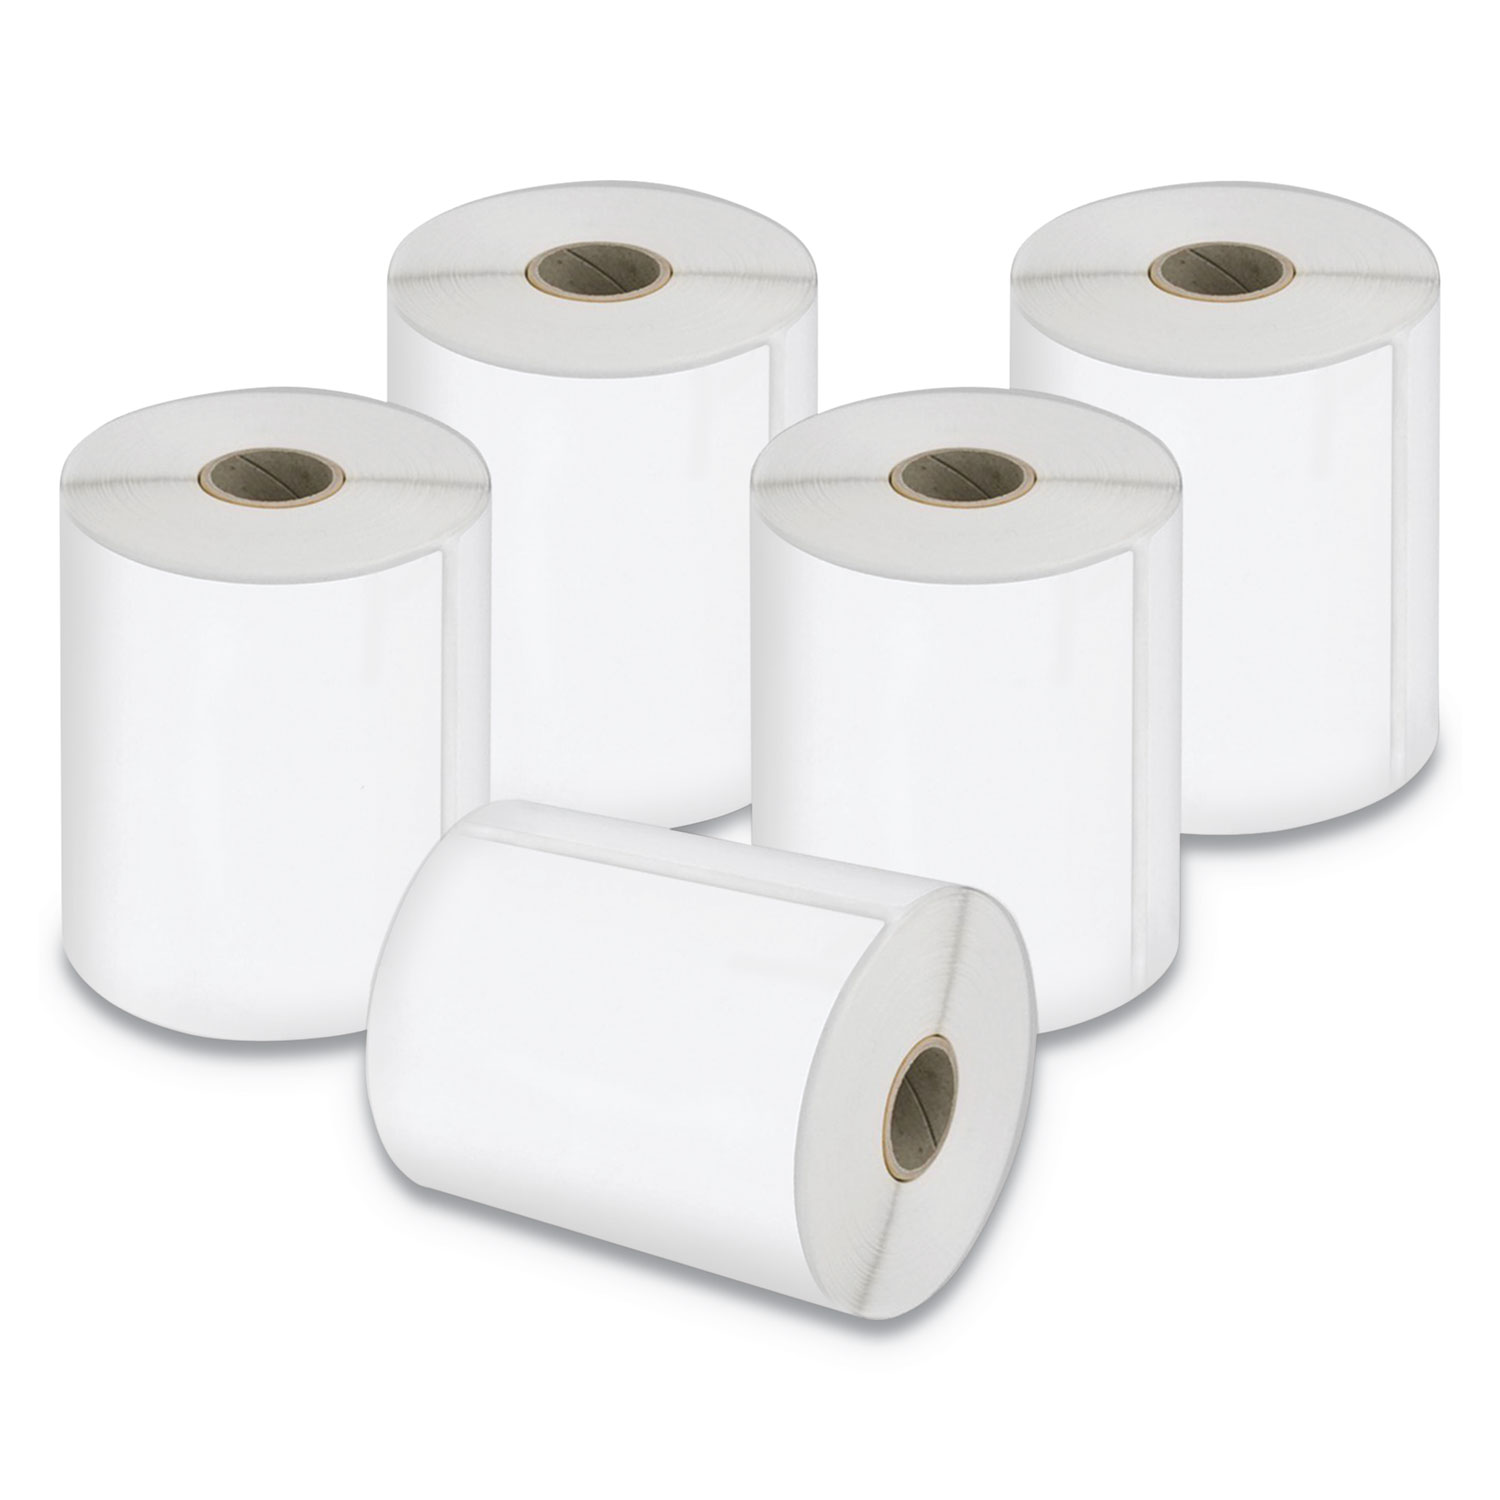 Dymo LabelWriter 4XL Label Printer Label Roll - 4" x 6" Length - Rectangle - Direct Thermal - White - Plastic - 220 / Pack